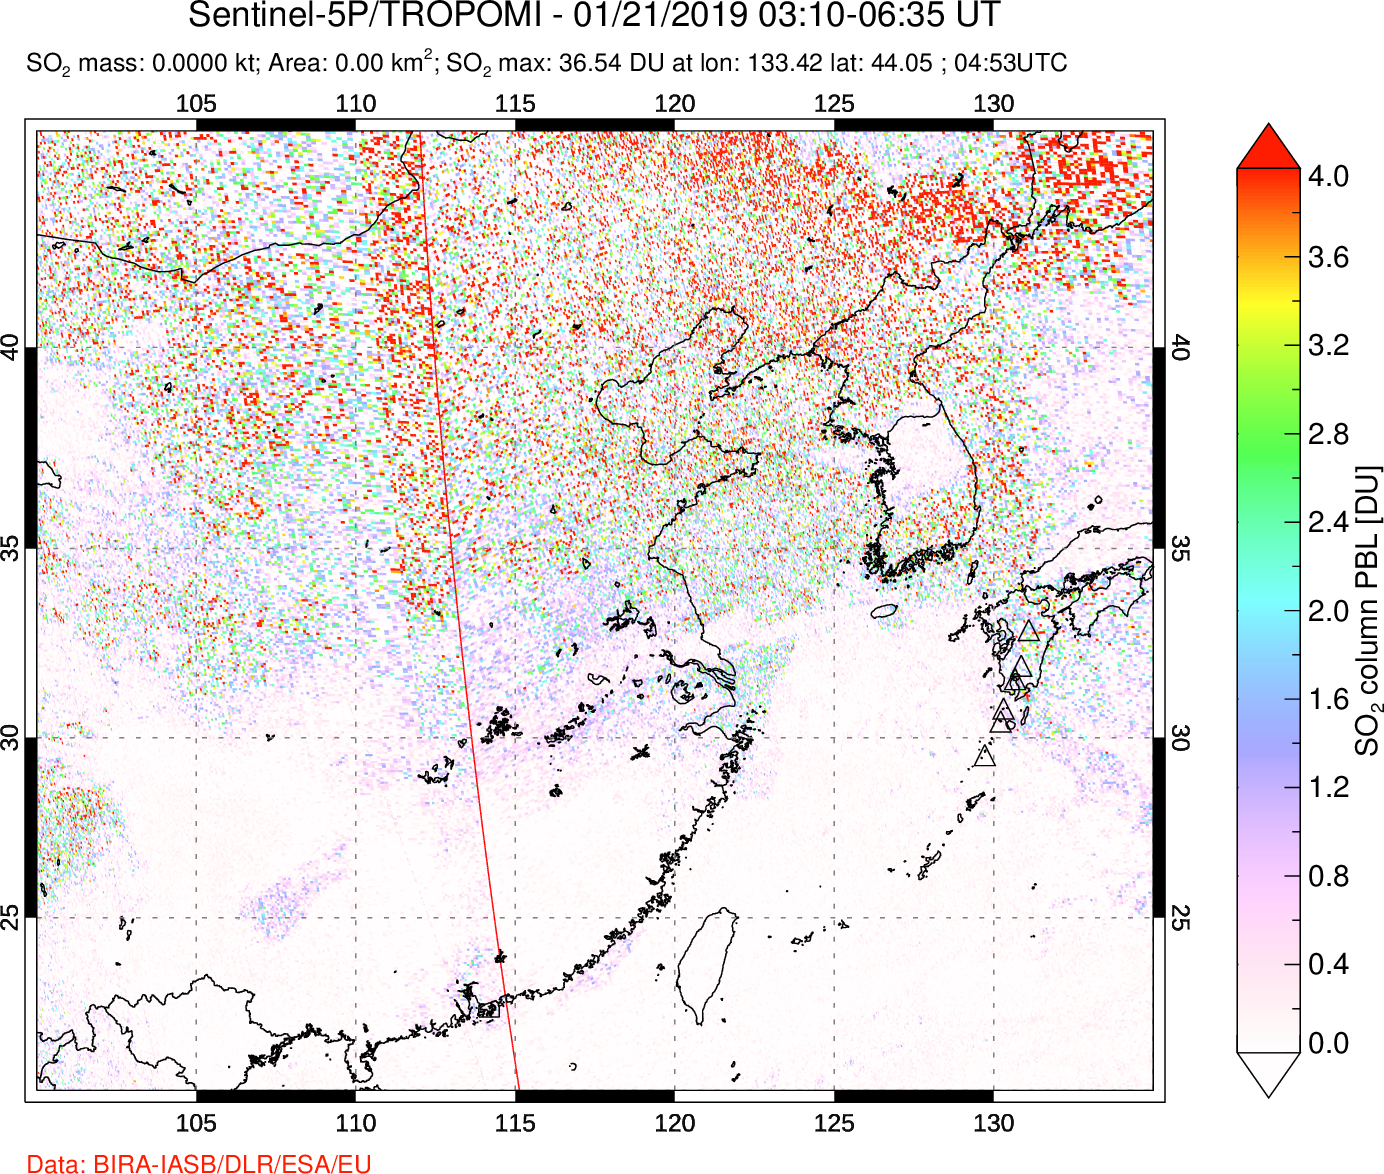 A sulfur dioxide image over Eastern China on Jan 21, 2019.